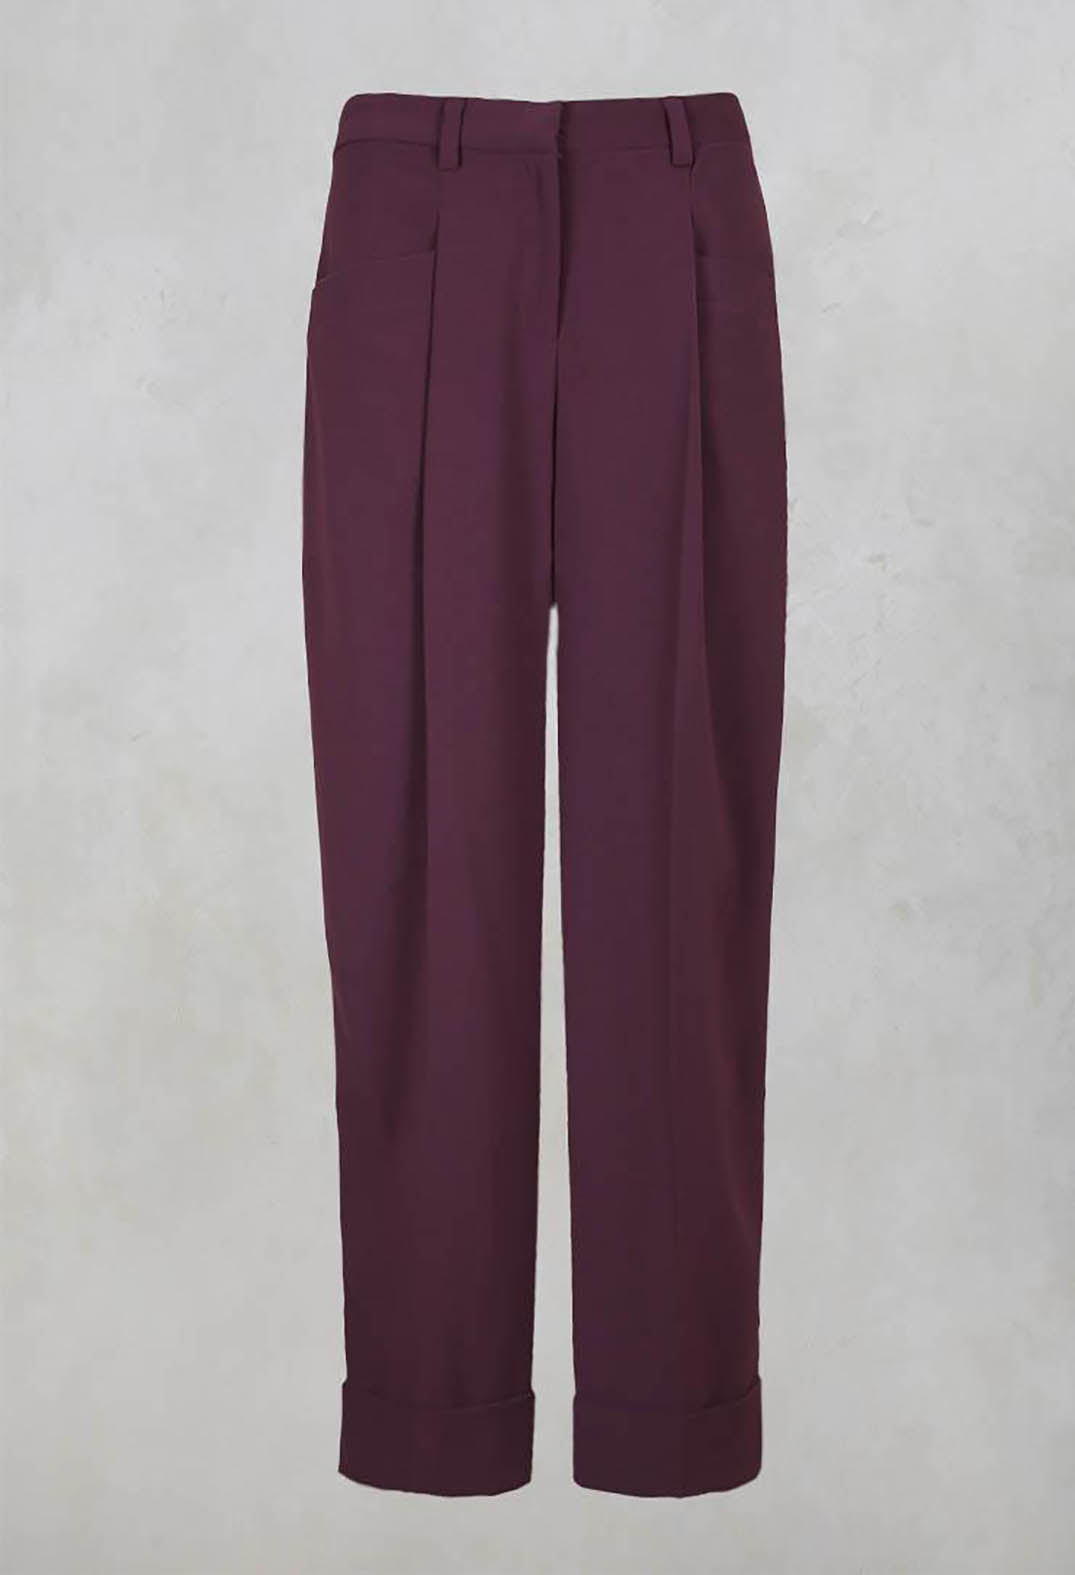 Pegged Trousers in Burgundy